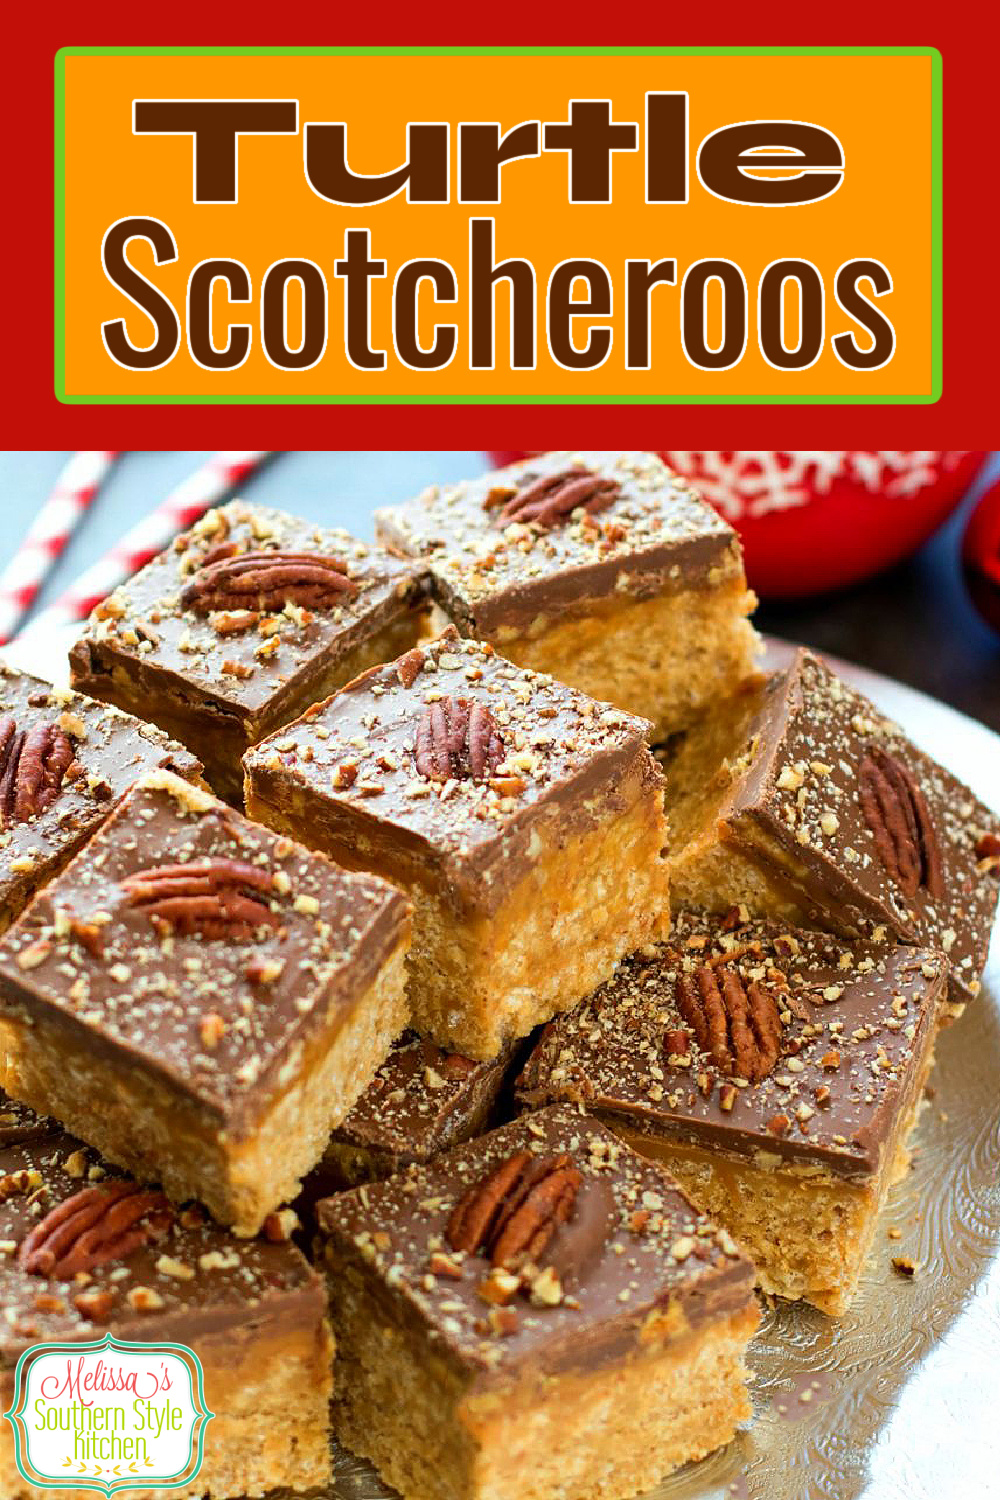 Add these gooey Caramel Pecan Turtle Scotcheroos to your holiday desserts this year #scotcheroos #turtlecandy #caramel #turtlescotcheroos #caramelsothceroos #nobake #sweets #desserts #dessertfoodrecipes #holidayrecipes #christmasrecipes #christmas #southernfood #southernrecipes via @melissasssk